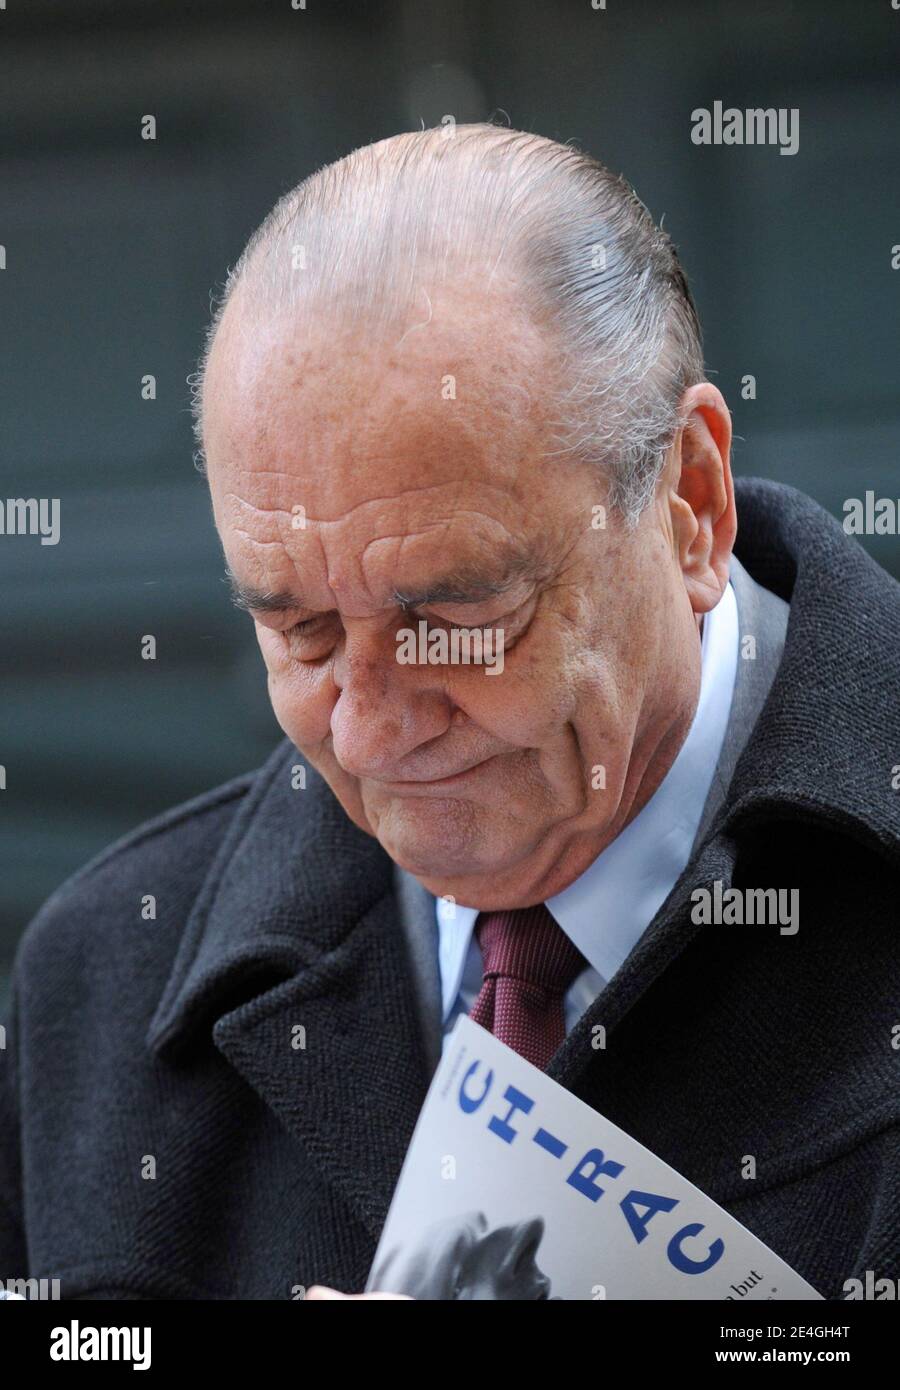 Former French President Jacques Chirac signs copie of his book 'Chaque pas  doit etre un but', as he arrives to his office in Paris, France on November  13, 2009. Photo by Mousse/ABACAPRESS.COM